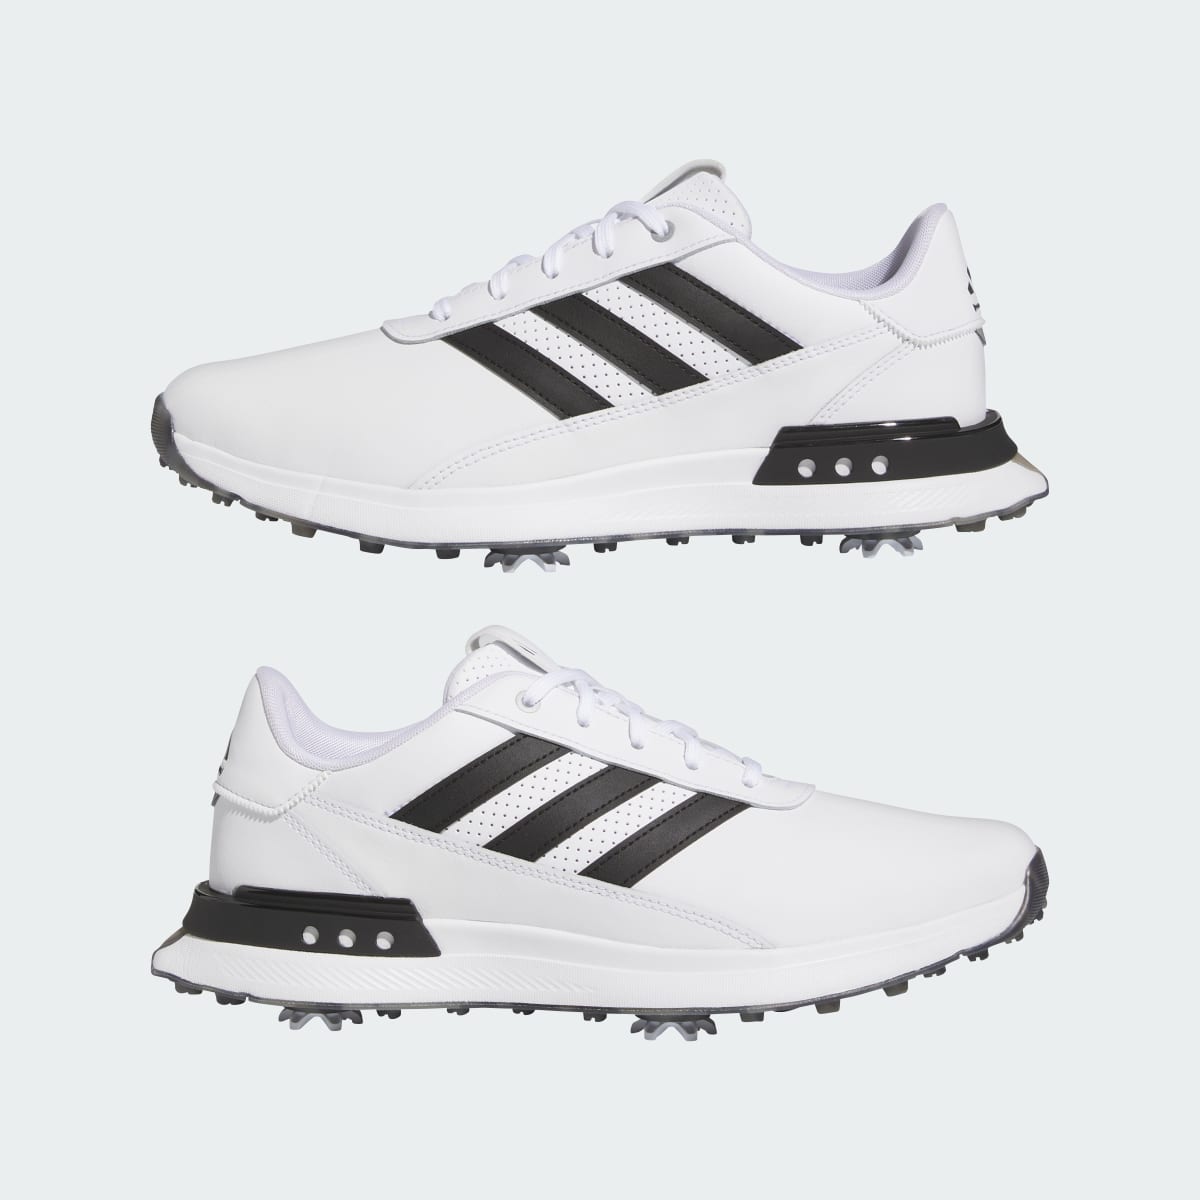 Adidas S2G 24 Golf Shoes. 11